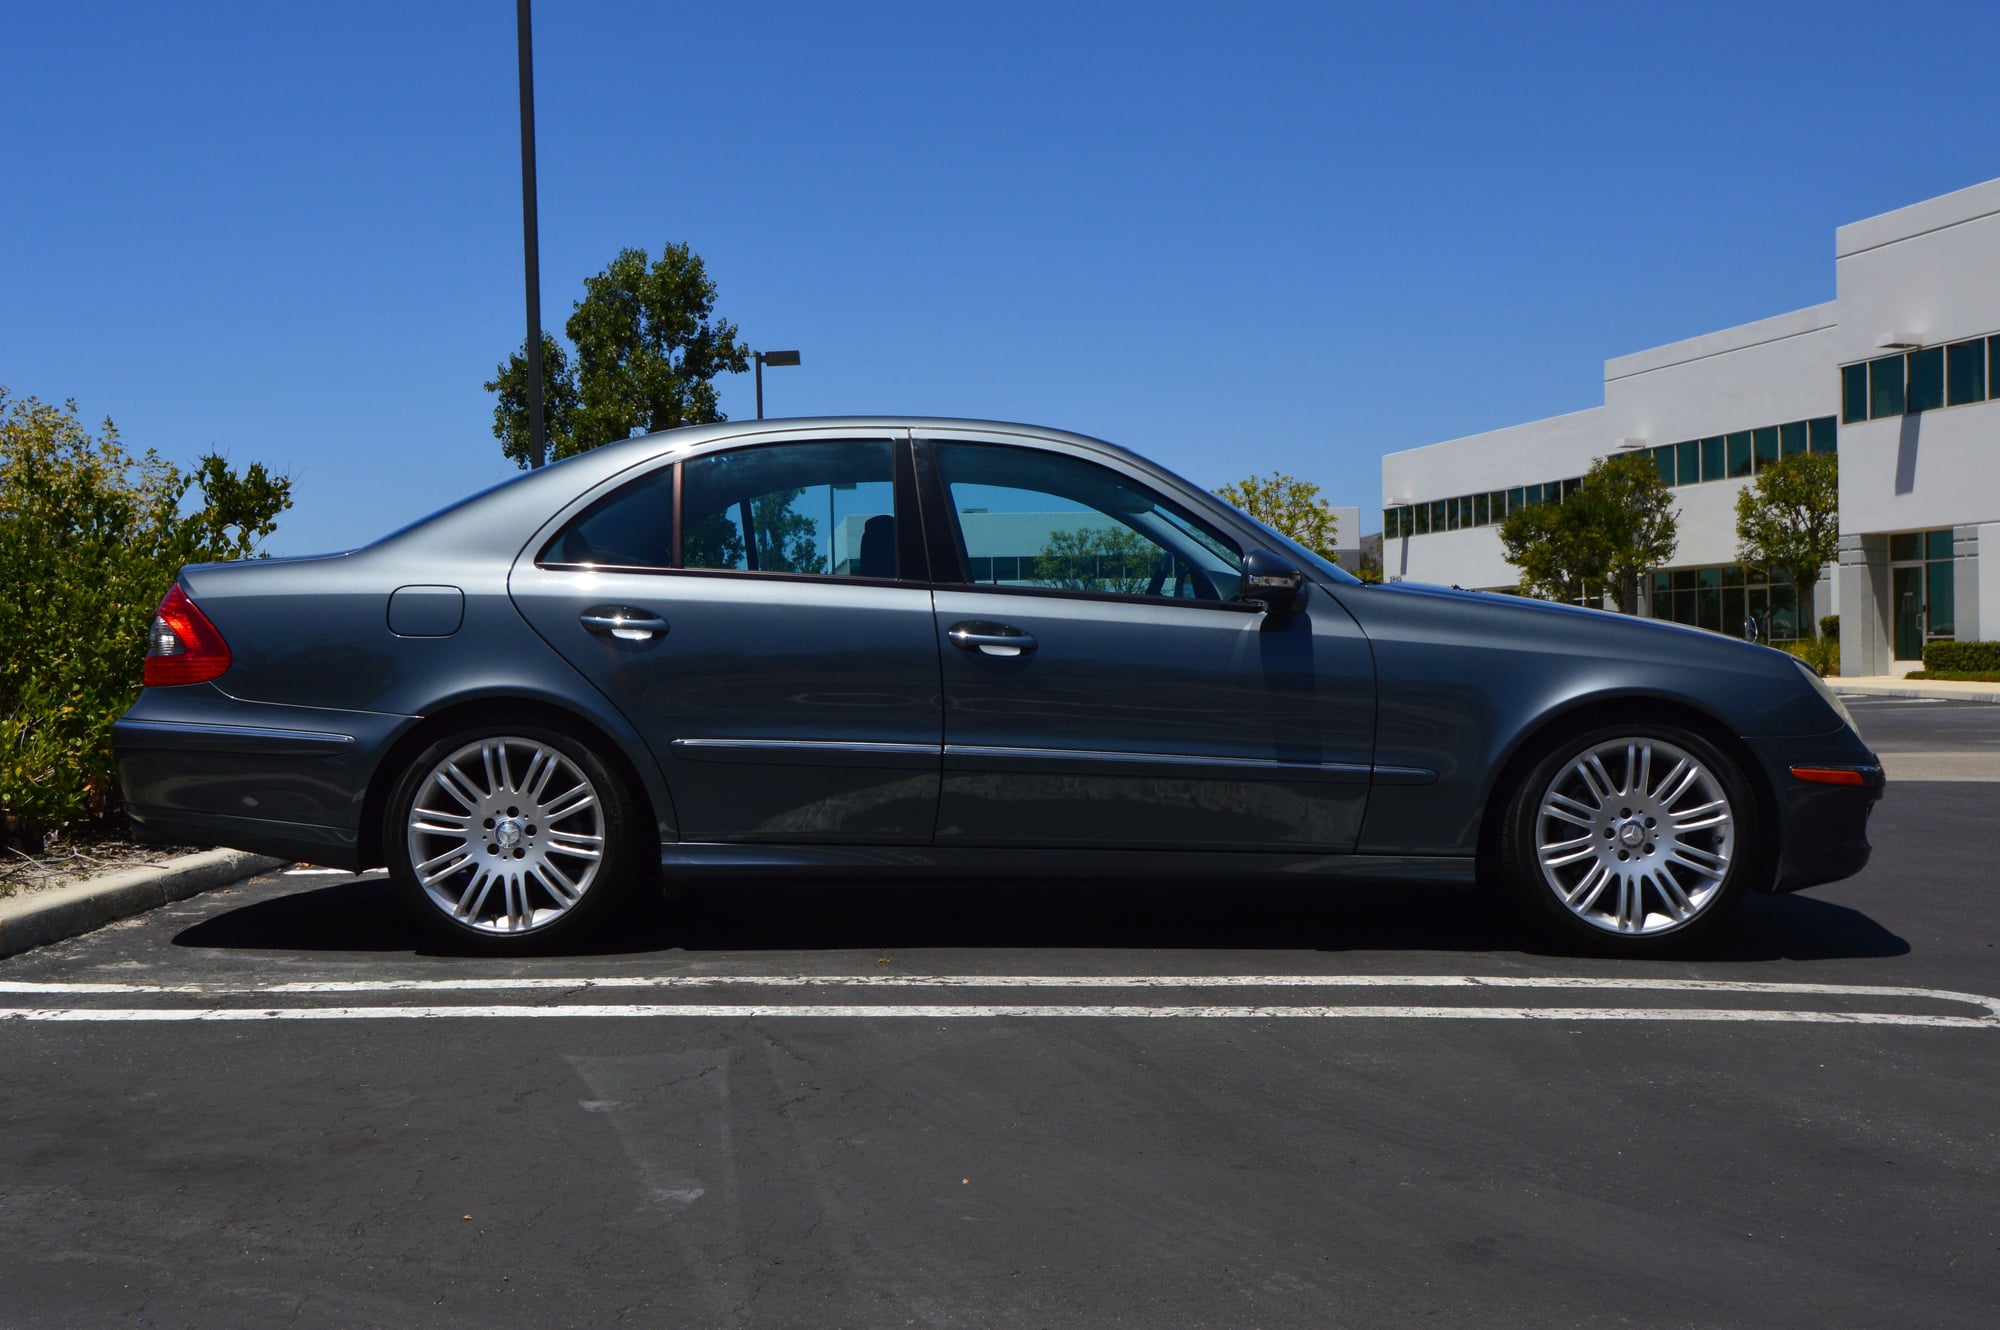 2008 Mercedes-Benz E350 - 2008 E350 - Used - VIN WDBUF56X98B249090 - 169,869 Miles - 6 cyl - 2WD - Automatic - Sedan - Gray - Lake Forrest, CA 92610, United States